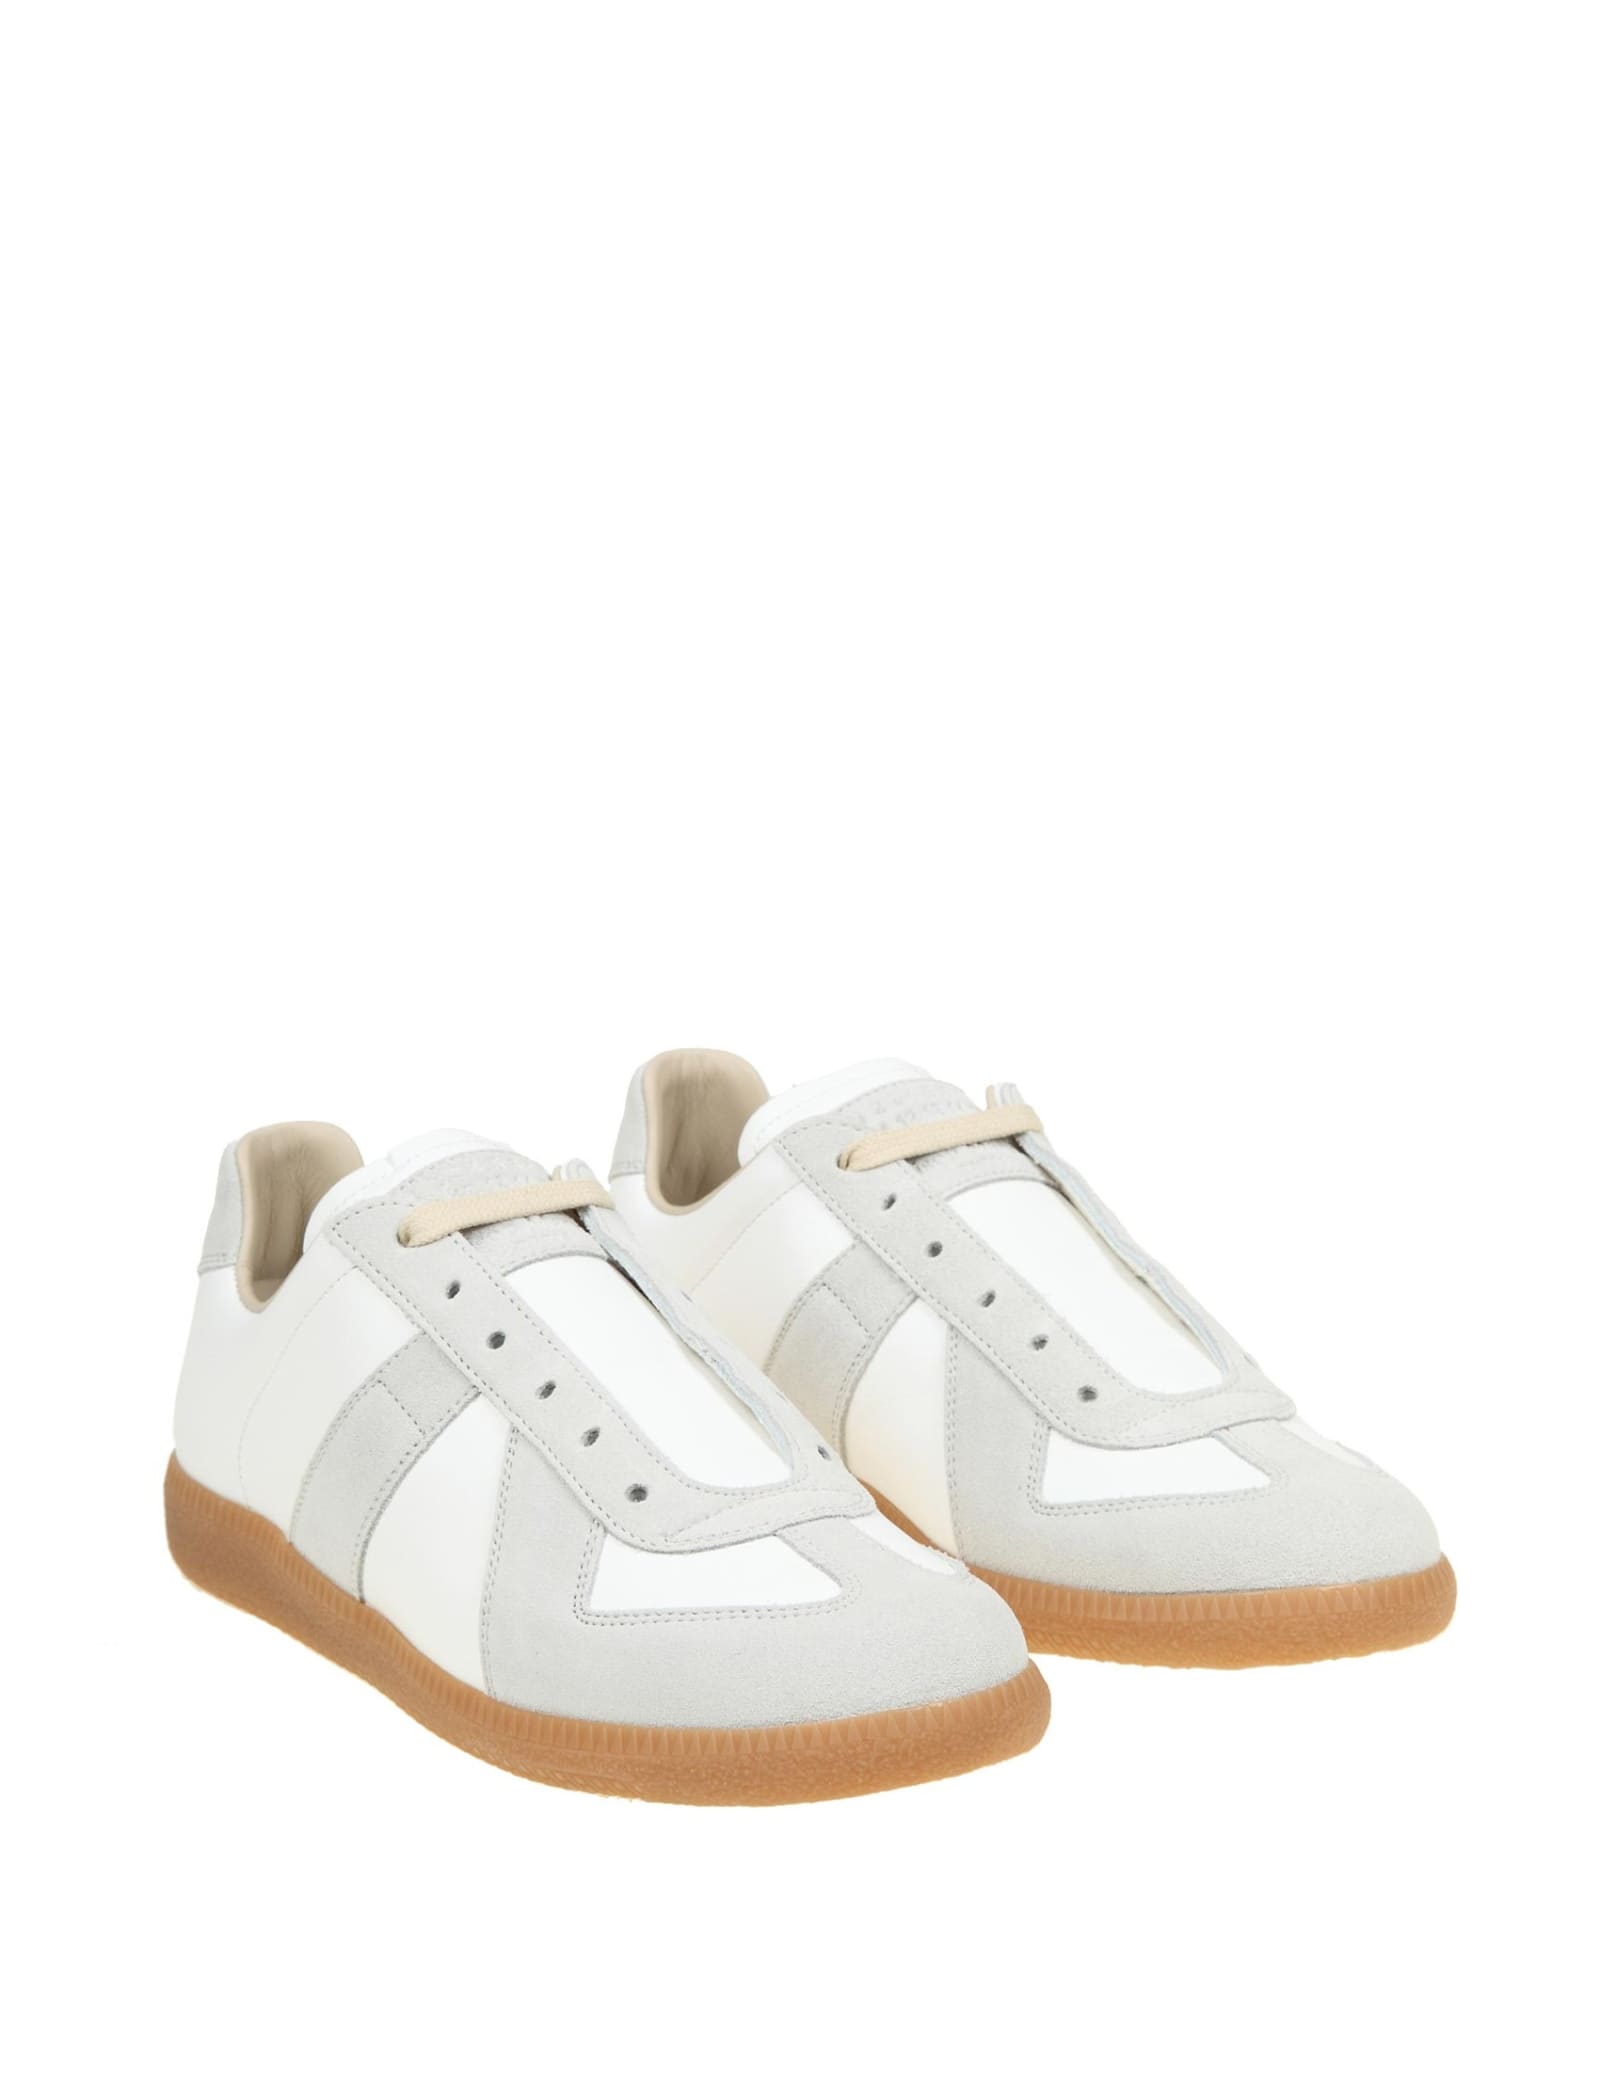 Shop Maison Margiela Replica Sneakers In White Color Leather And Suede